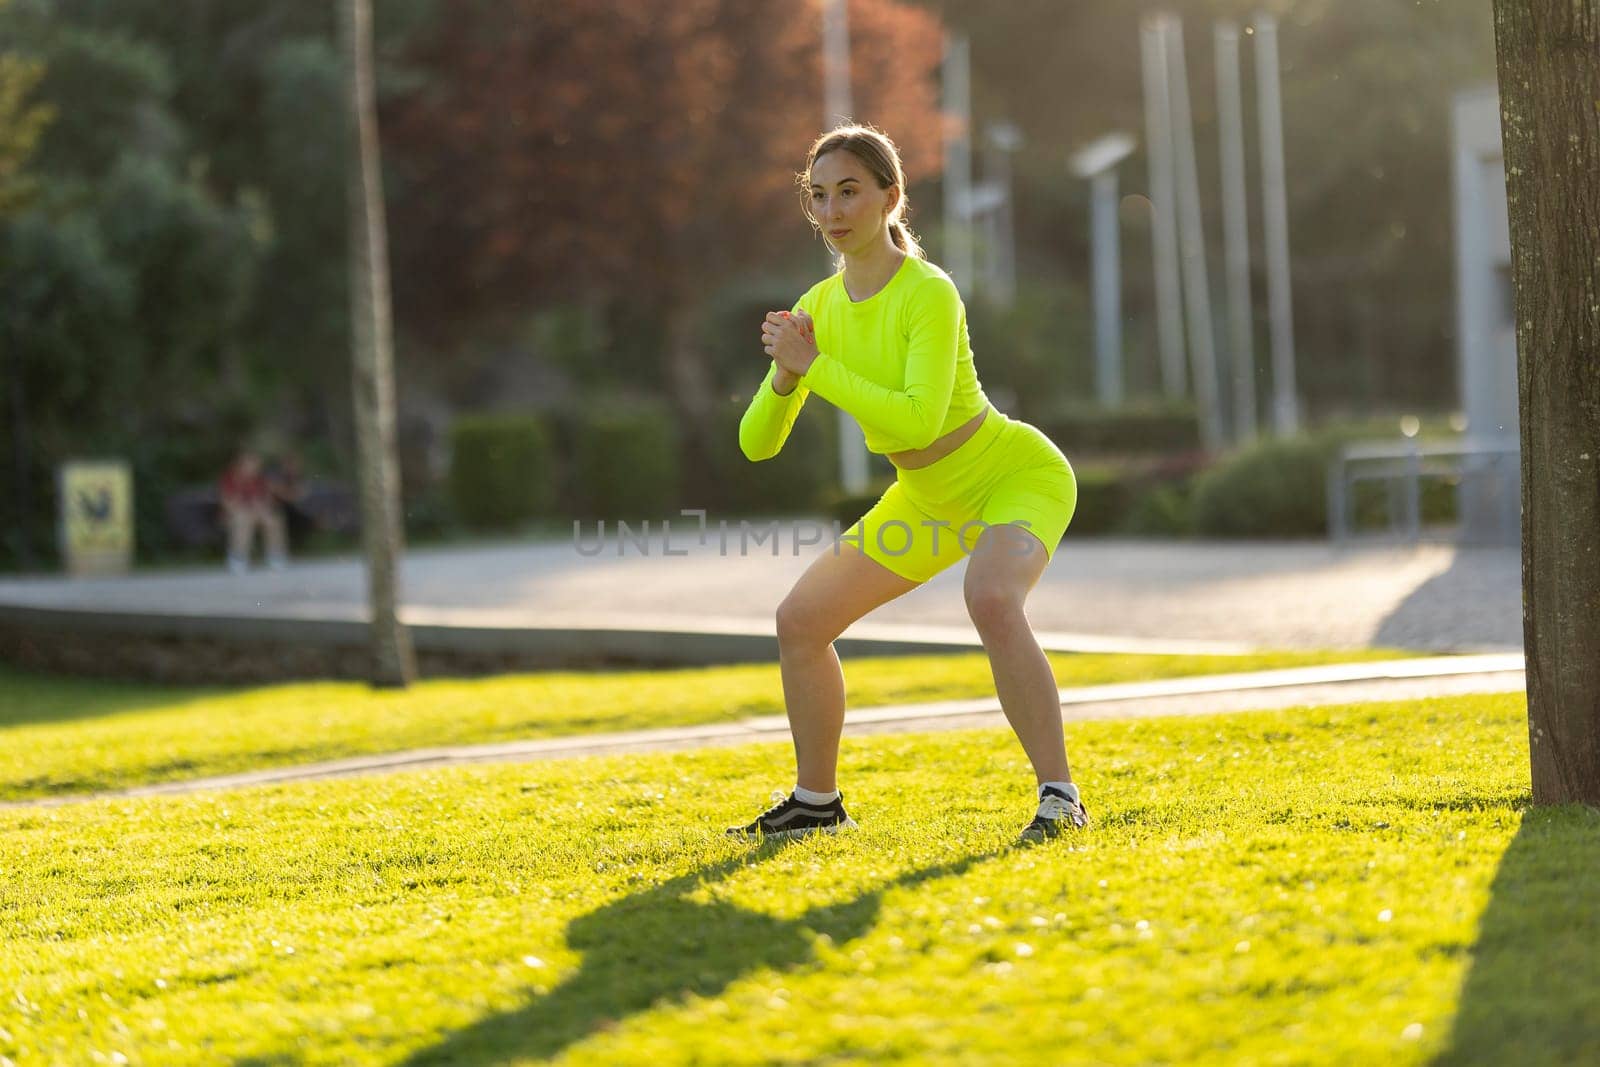 A woman in a neon yellow outfit is doing a yoga pose on a grassy field. The bright colors of her outfit and the green grass create a cheerful and energetic atmosphere